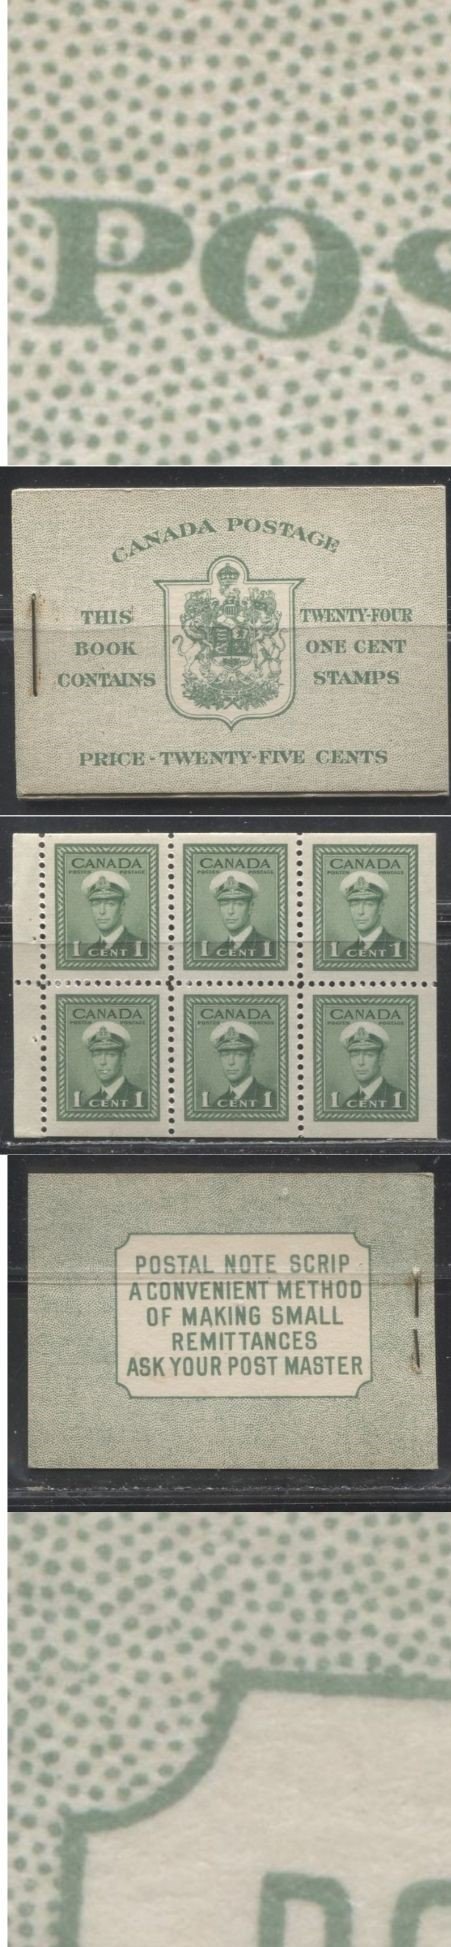 Lot 249 Canada #BK32f 1942-1949 War Issue, Complete 25¢ English Booklet, 4 Panes of 1c Green,  Smooth Vertical Wove Paper, Harris Front Cover Type IIb, Back Cover Type Cbii, 7c & 6c Airmail Rates Page